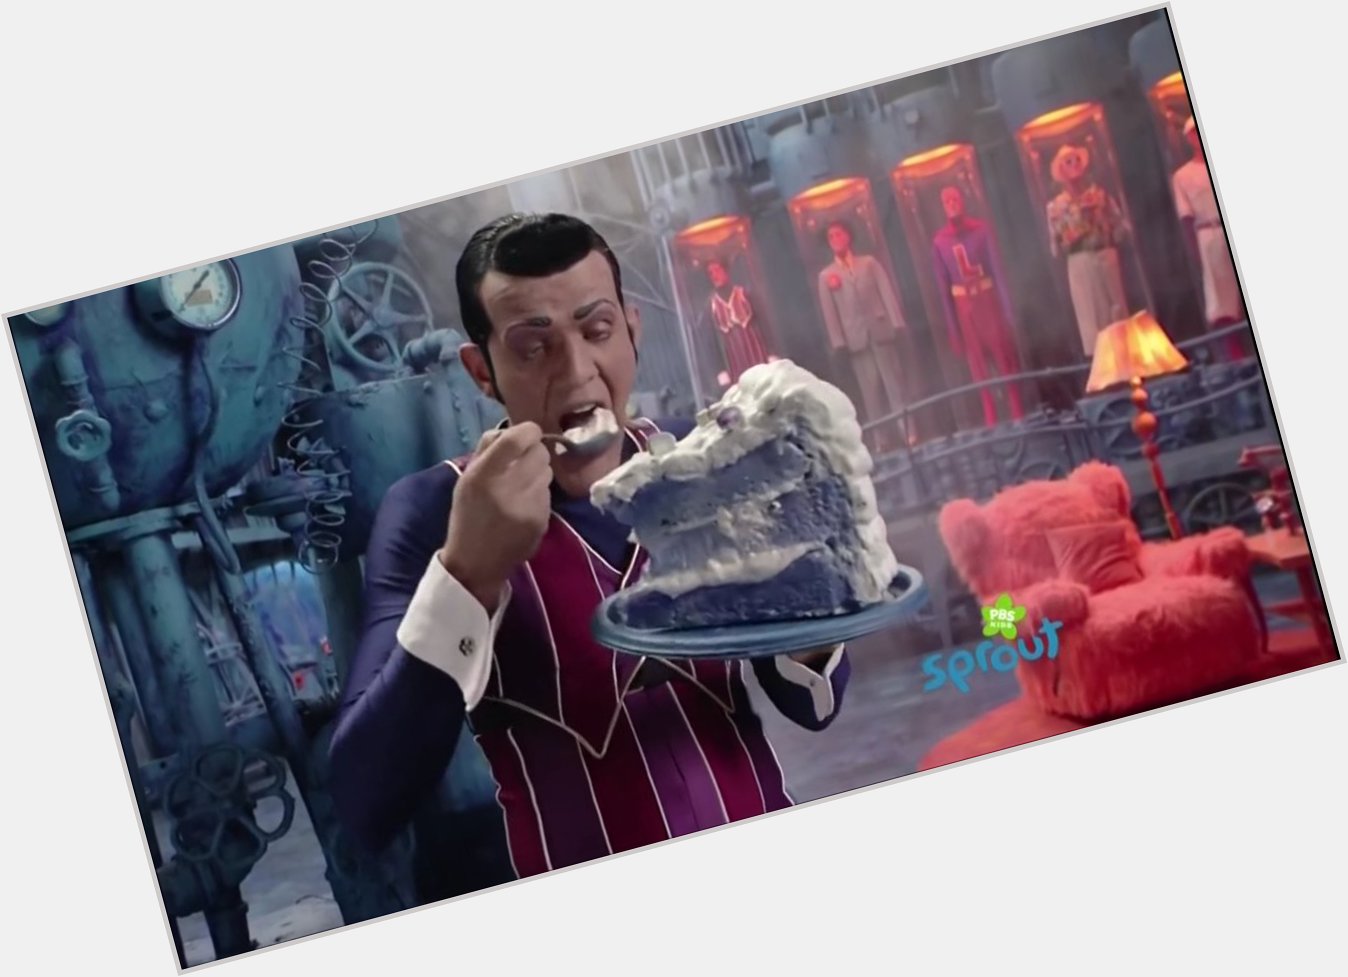 Happy birthday to the one and only Stefán Karl Stefánsson the actor of Robbie Rotten. He turned 42 today. 